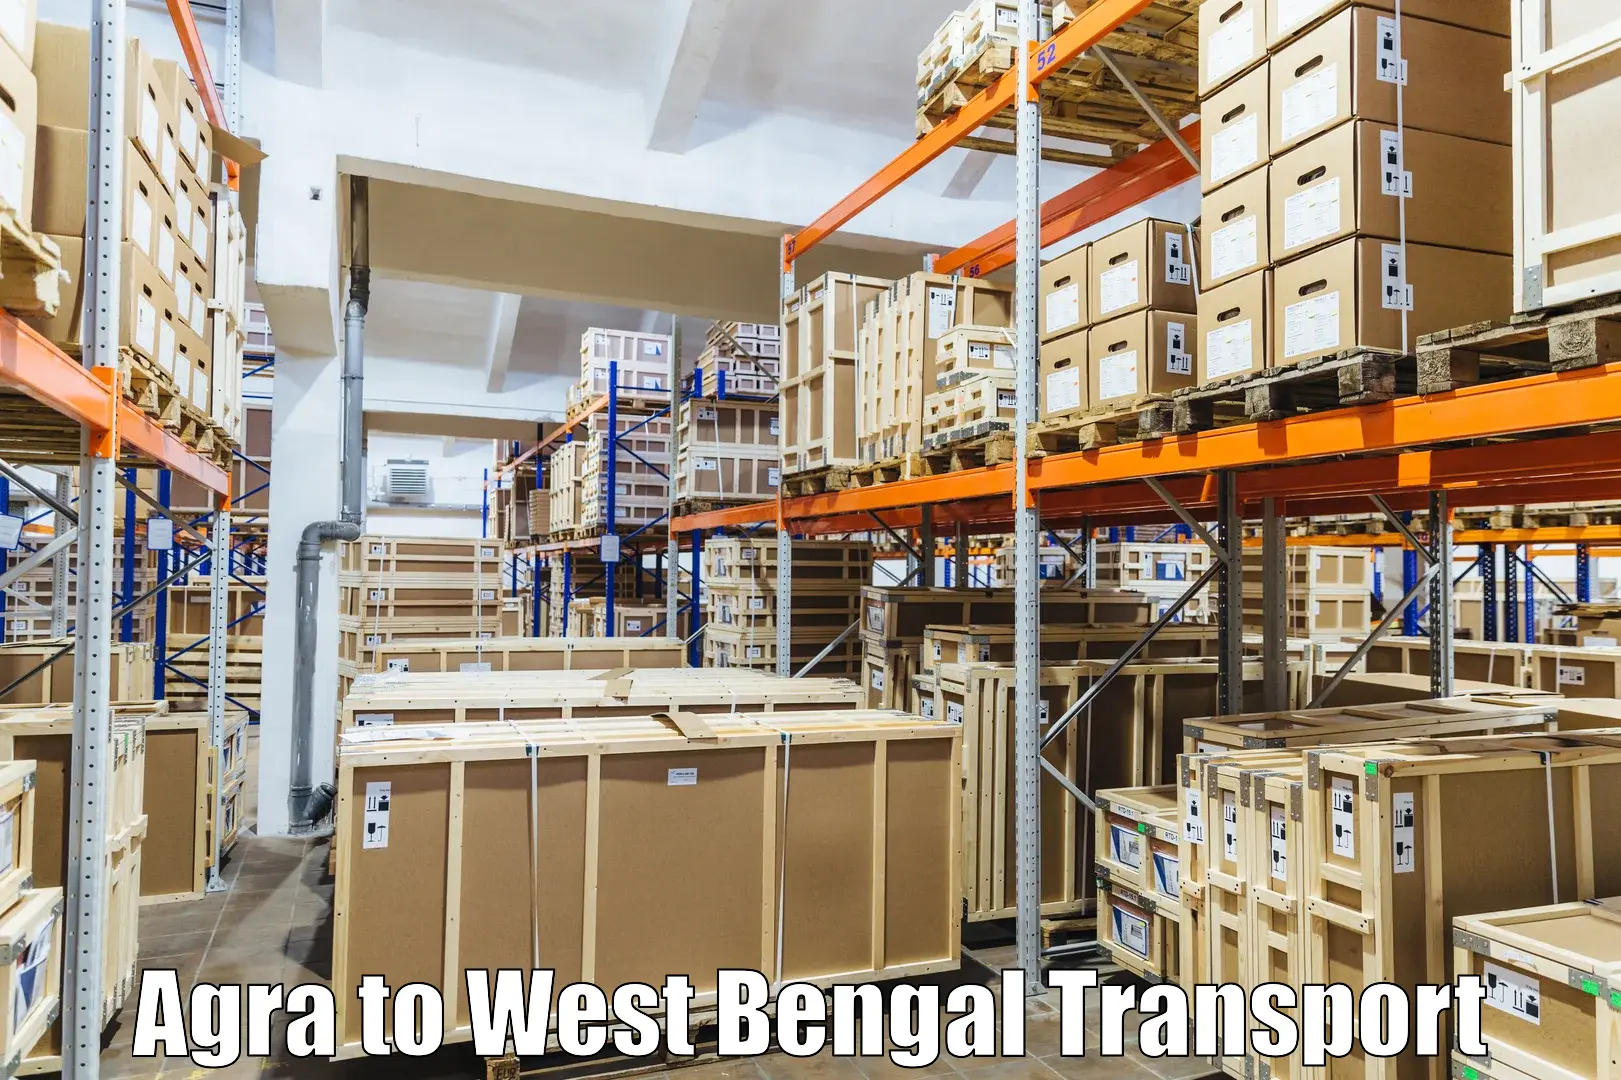 Bike shipping service Agra to West Bengal